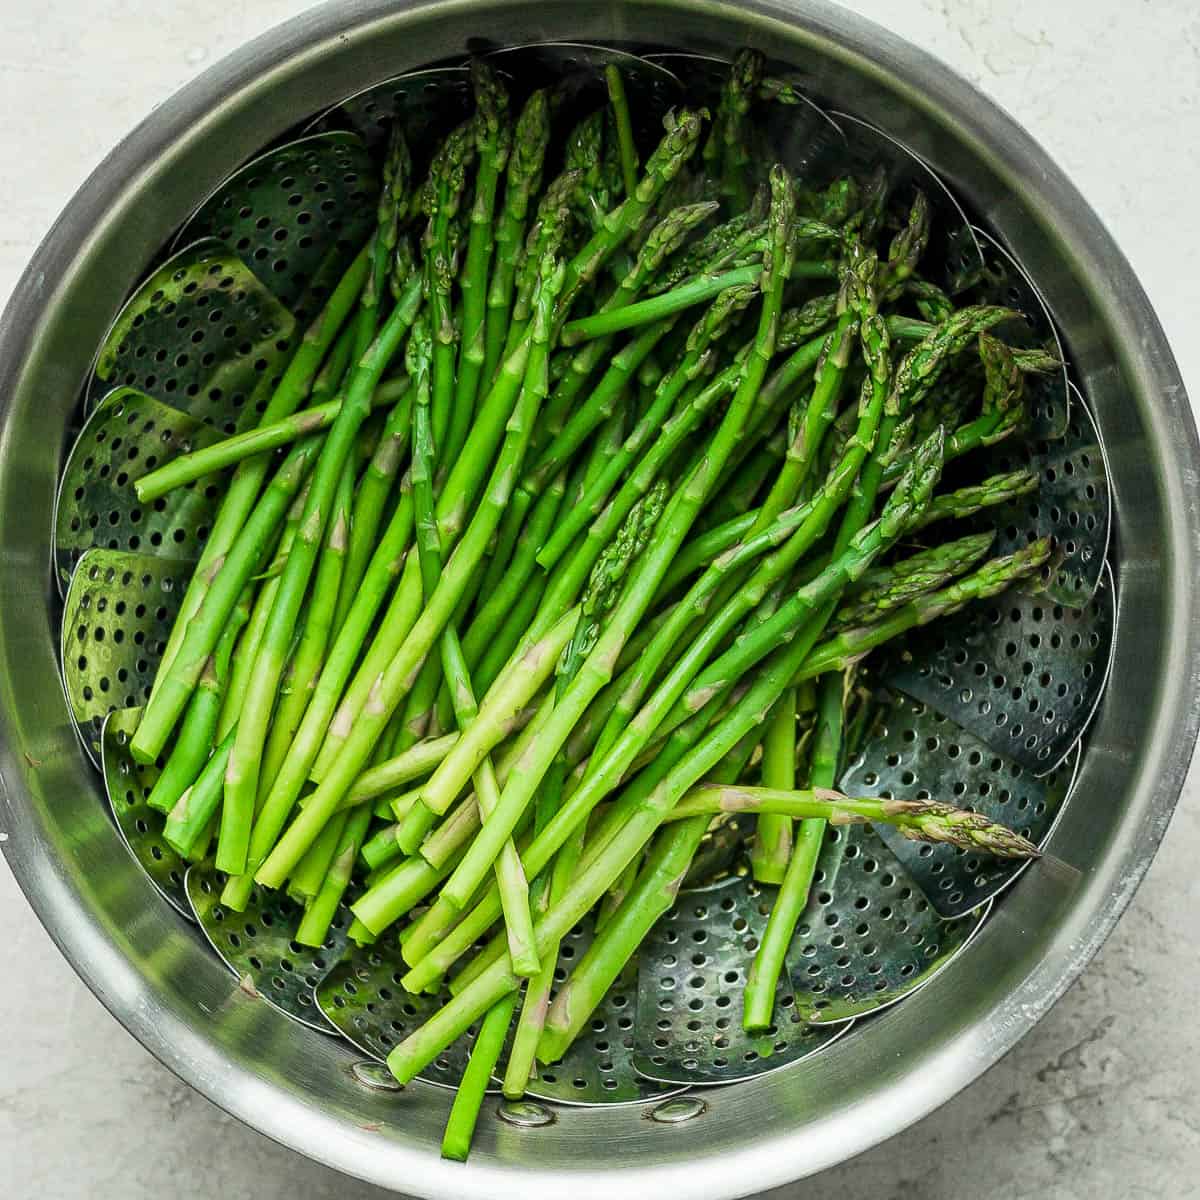 https://thewoodenskillet.com/wp-content/uploads/2022/04/how-to-steam-asparagus-1.jpg